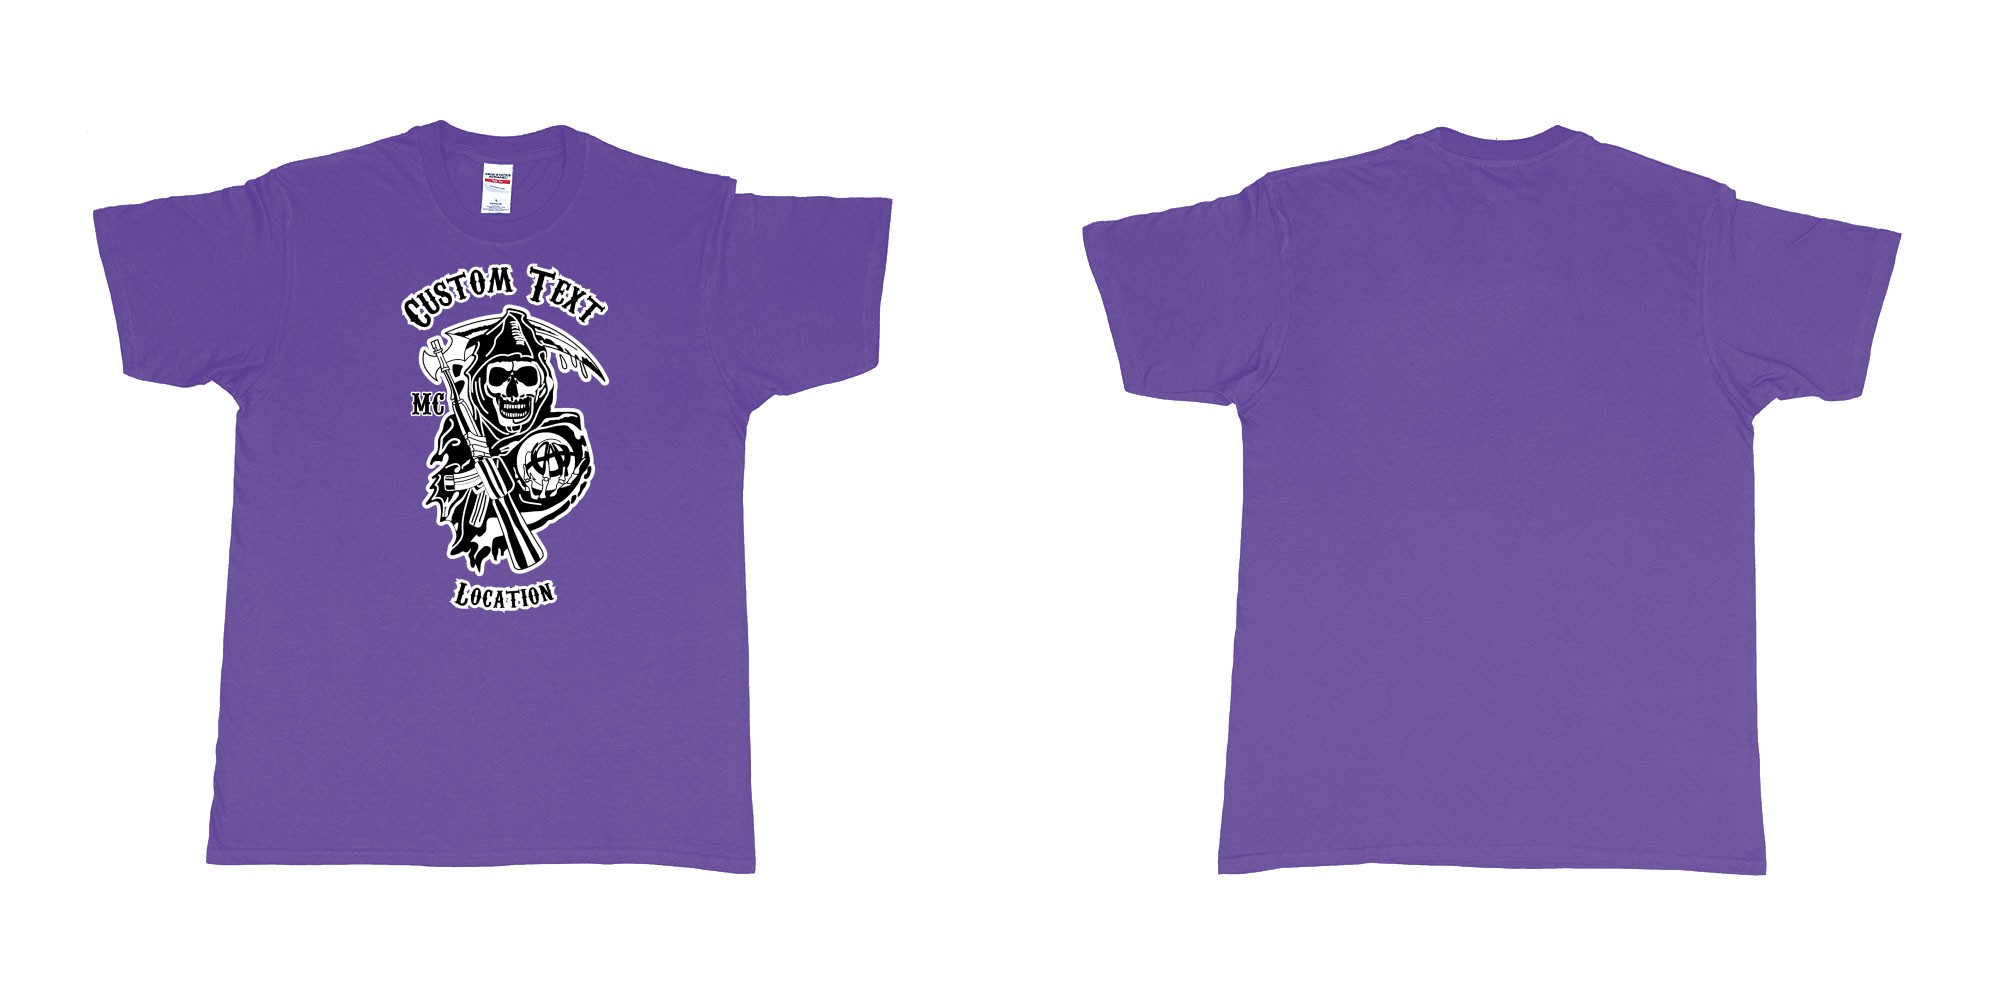 Custom tshirt design son of anarchy logo custom text in fabric color purple choice your own text made in Bali by The Pirate Way